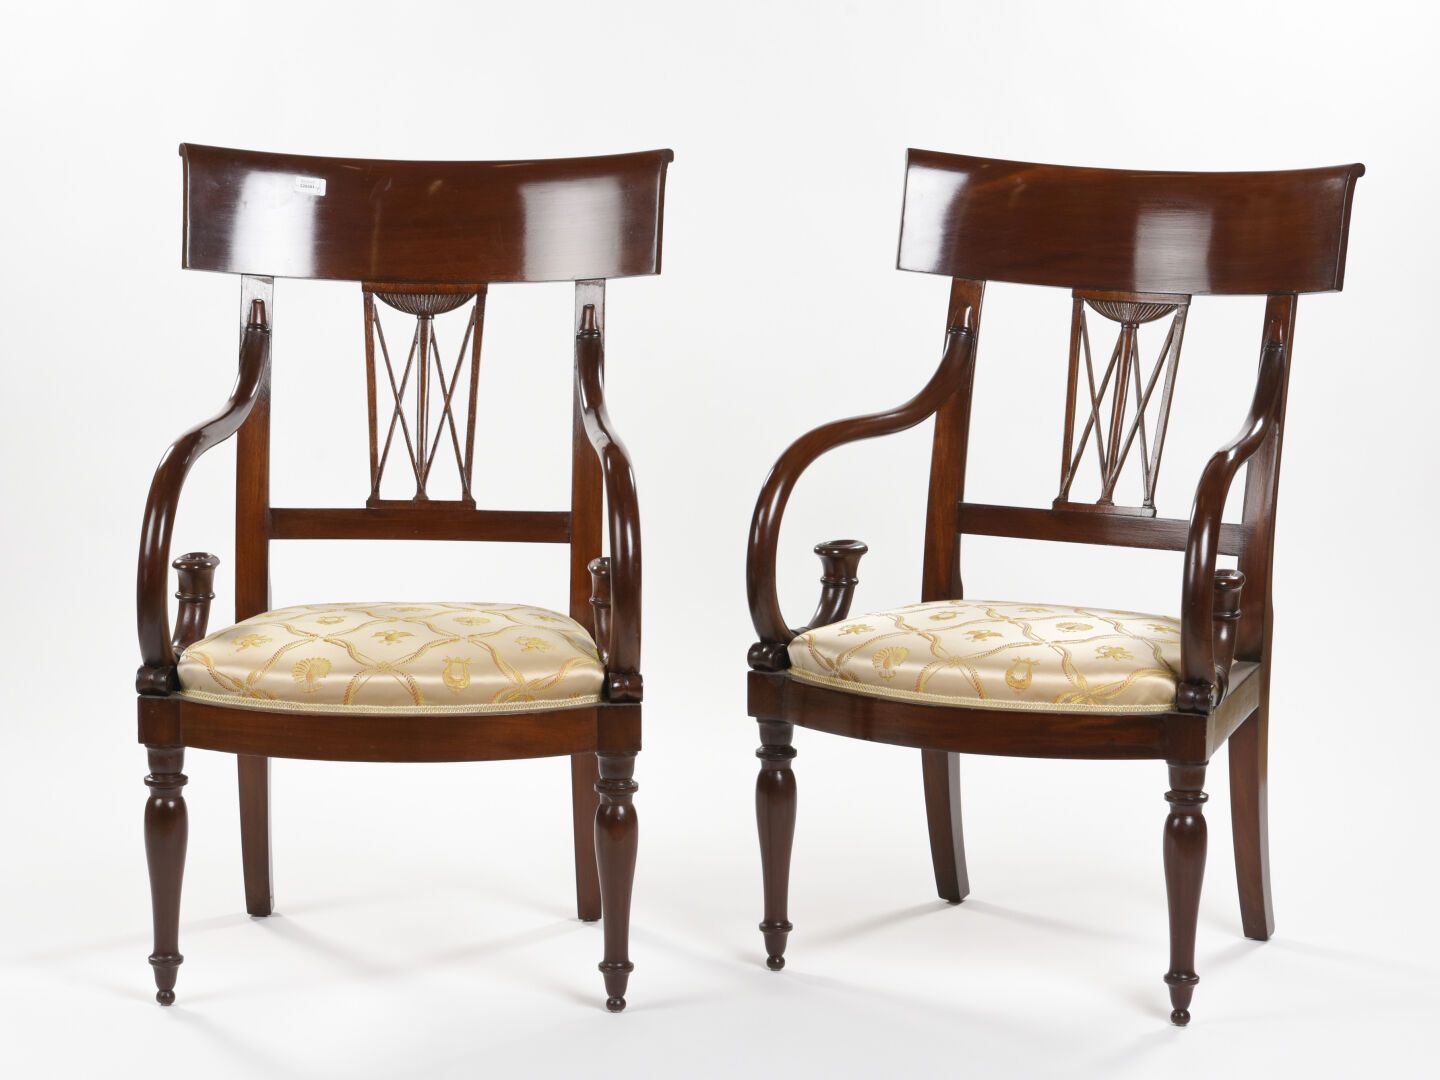 Null François Honoré-Georges and Georges JACOB (1803-1813)
Pair of mahogany armc&hellip;